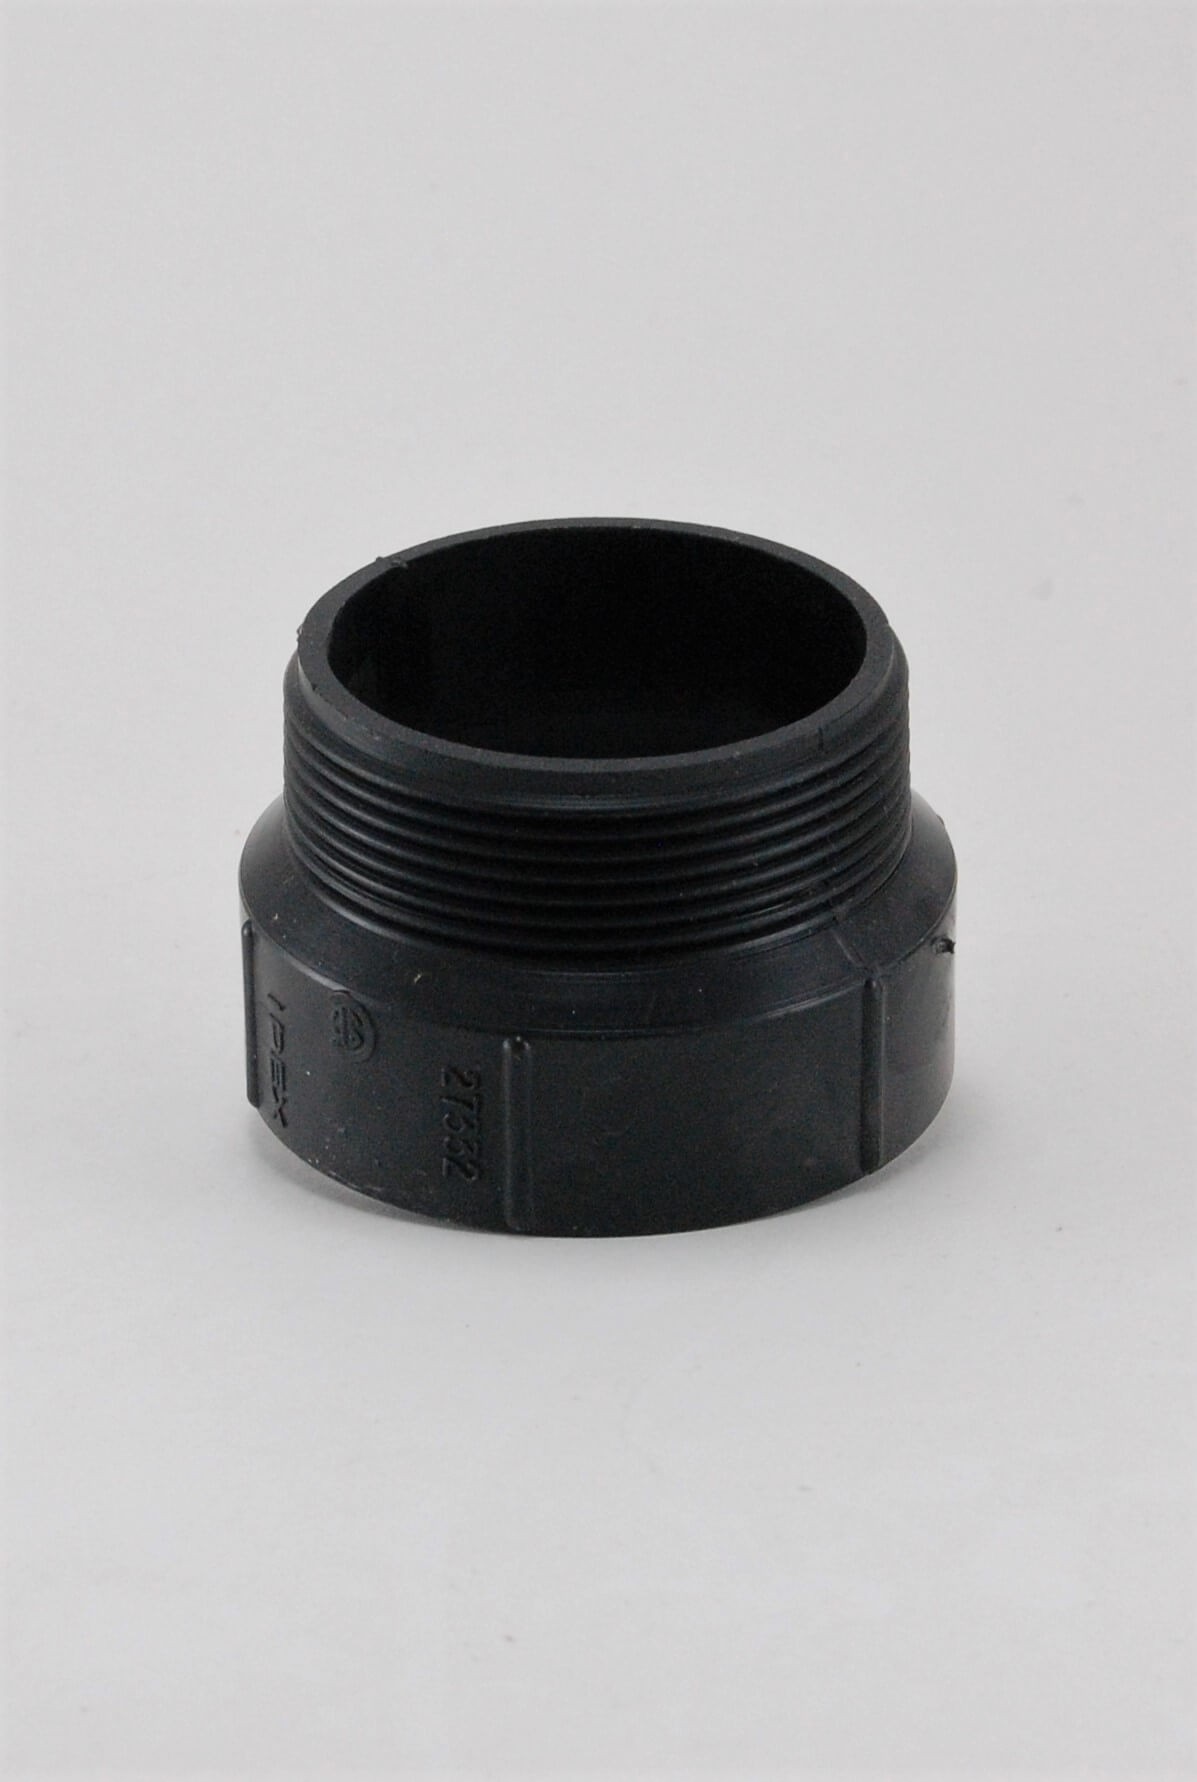 ABS Male Adapter